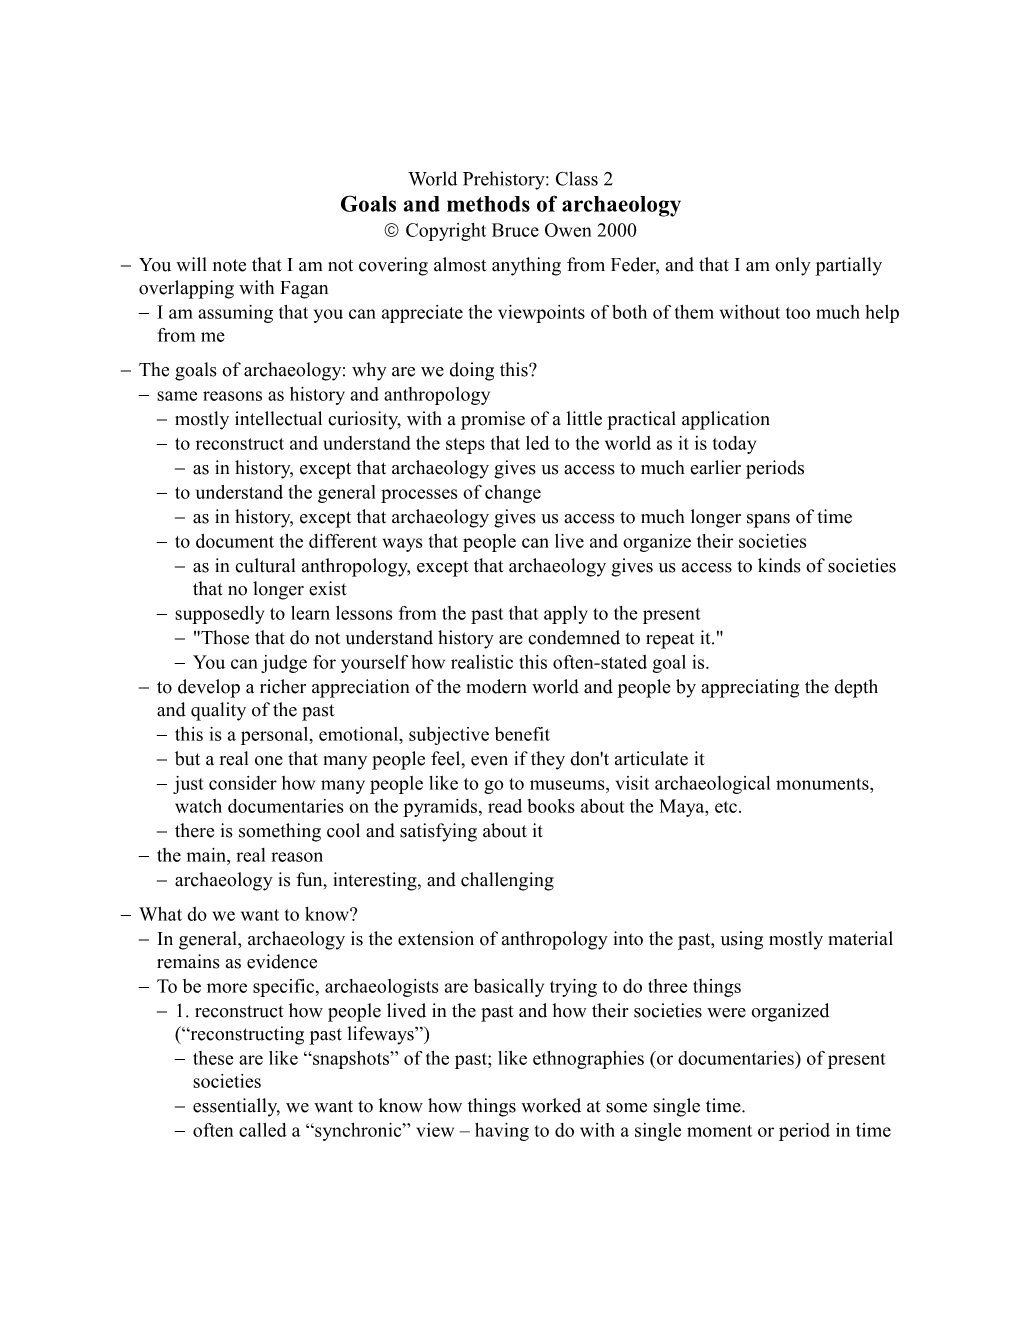 World Prehistory S 2000 / Owen: Goals and Methods of Archaeology P. 1